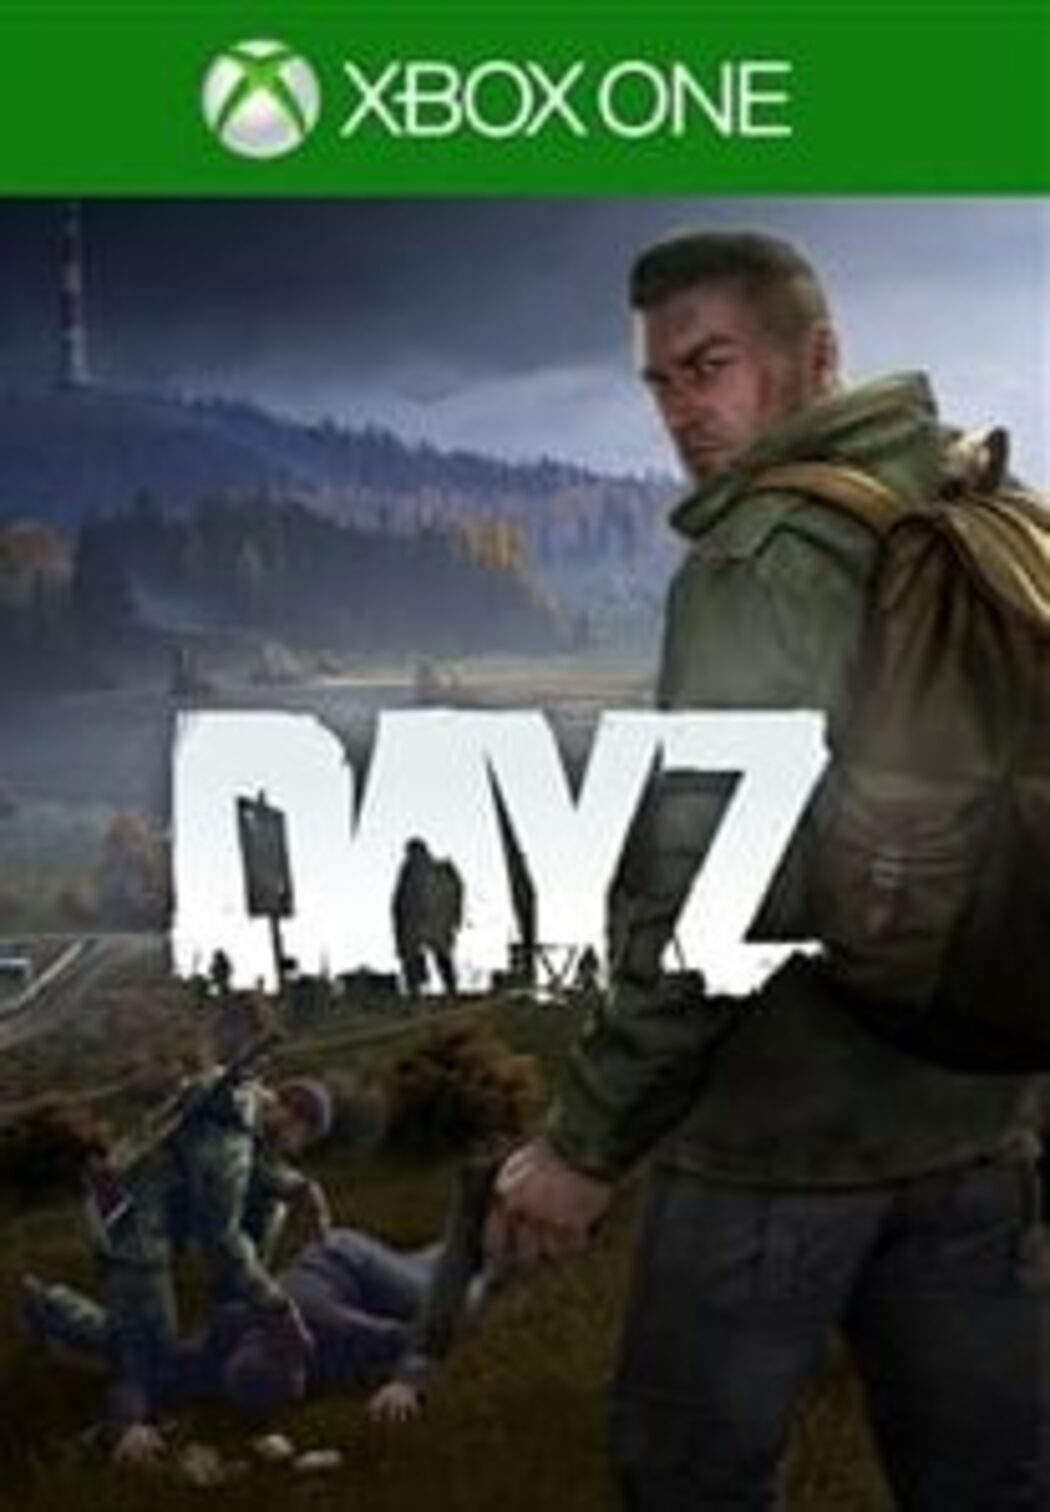 Dijk Moedig abces DayZ (Xbox One) key US | Buy CD key at the best price | ENEBA